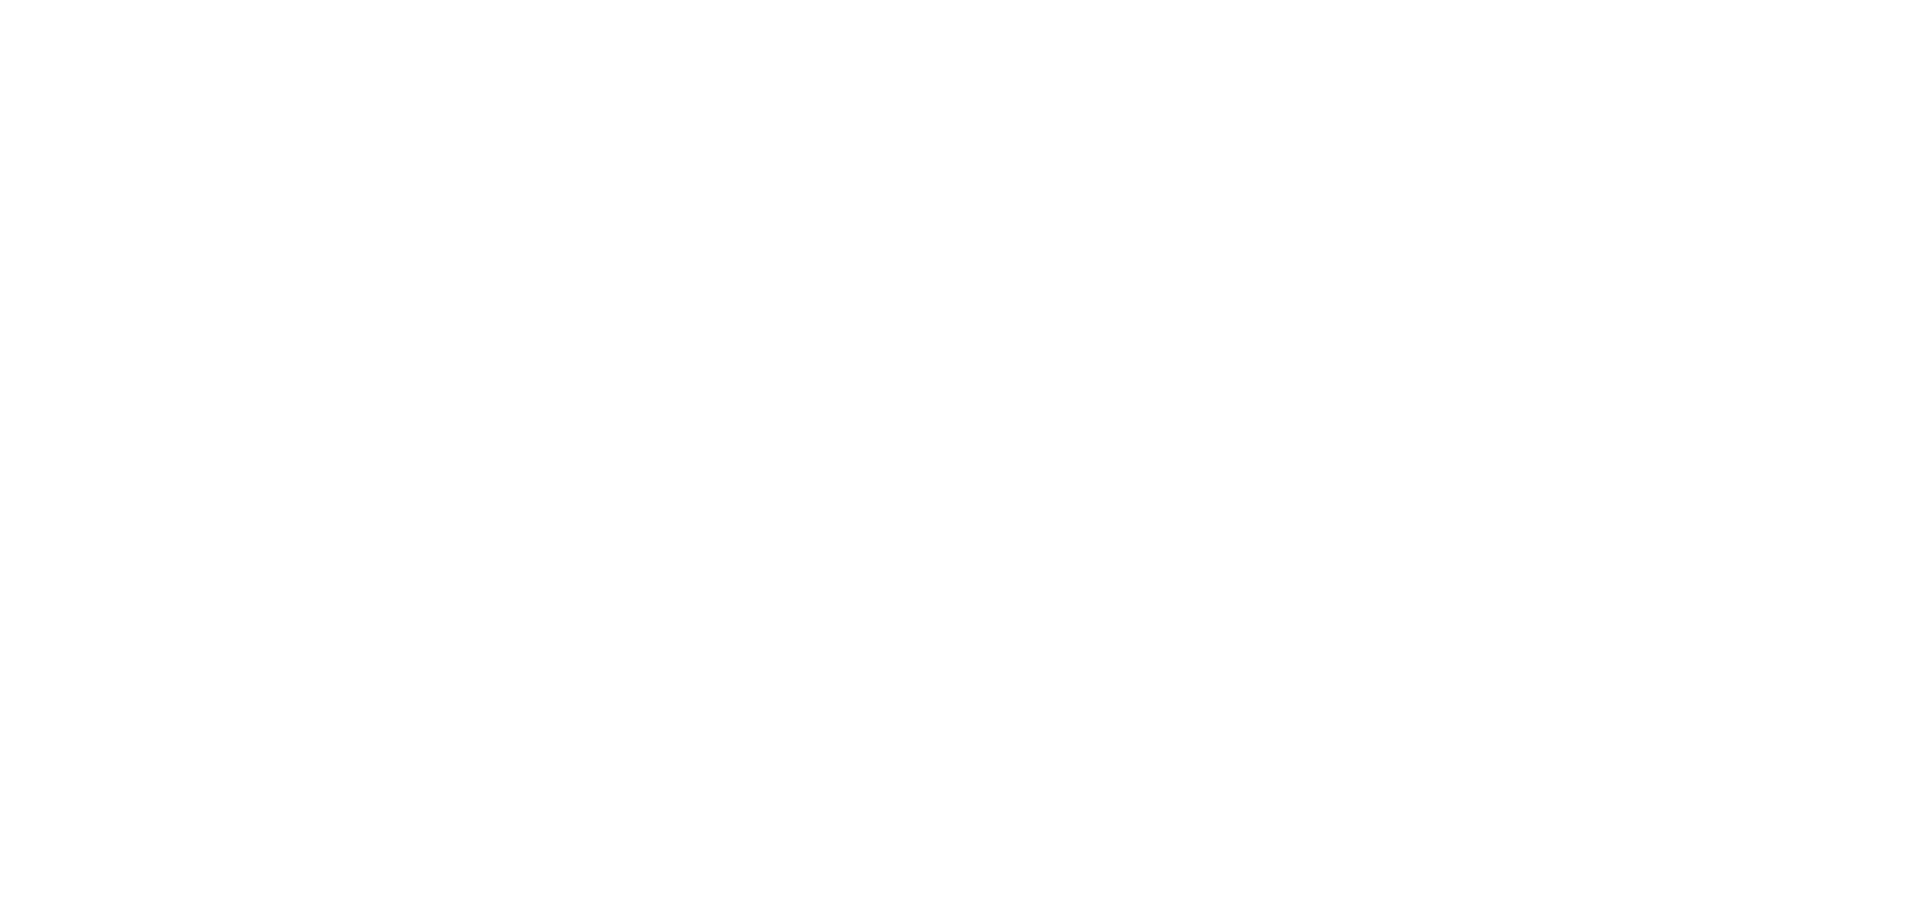 Don’t let denture adhesive keep you from living the life you want